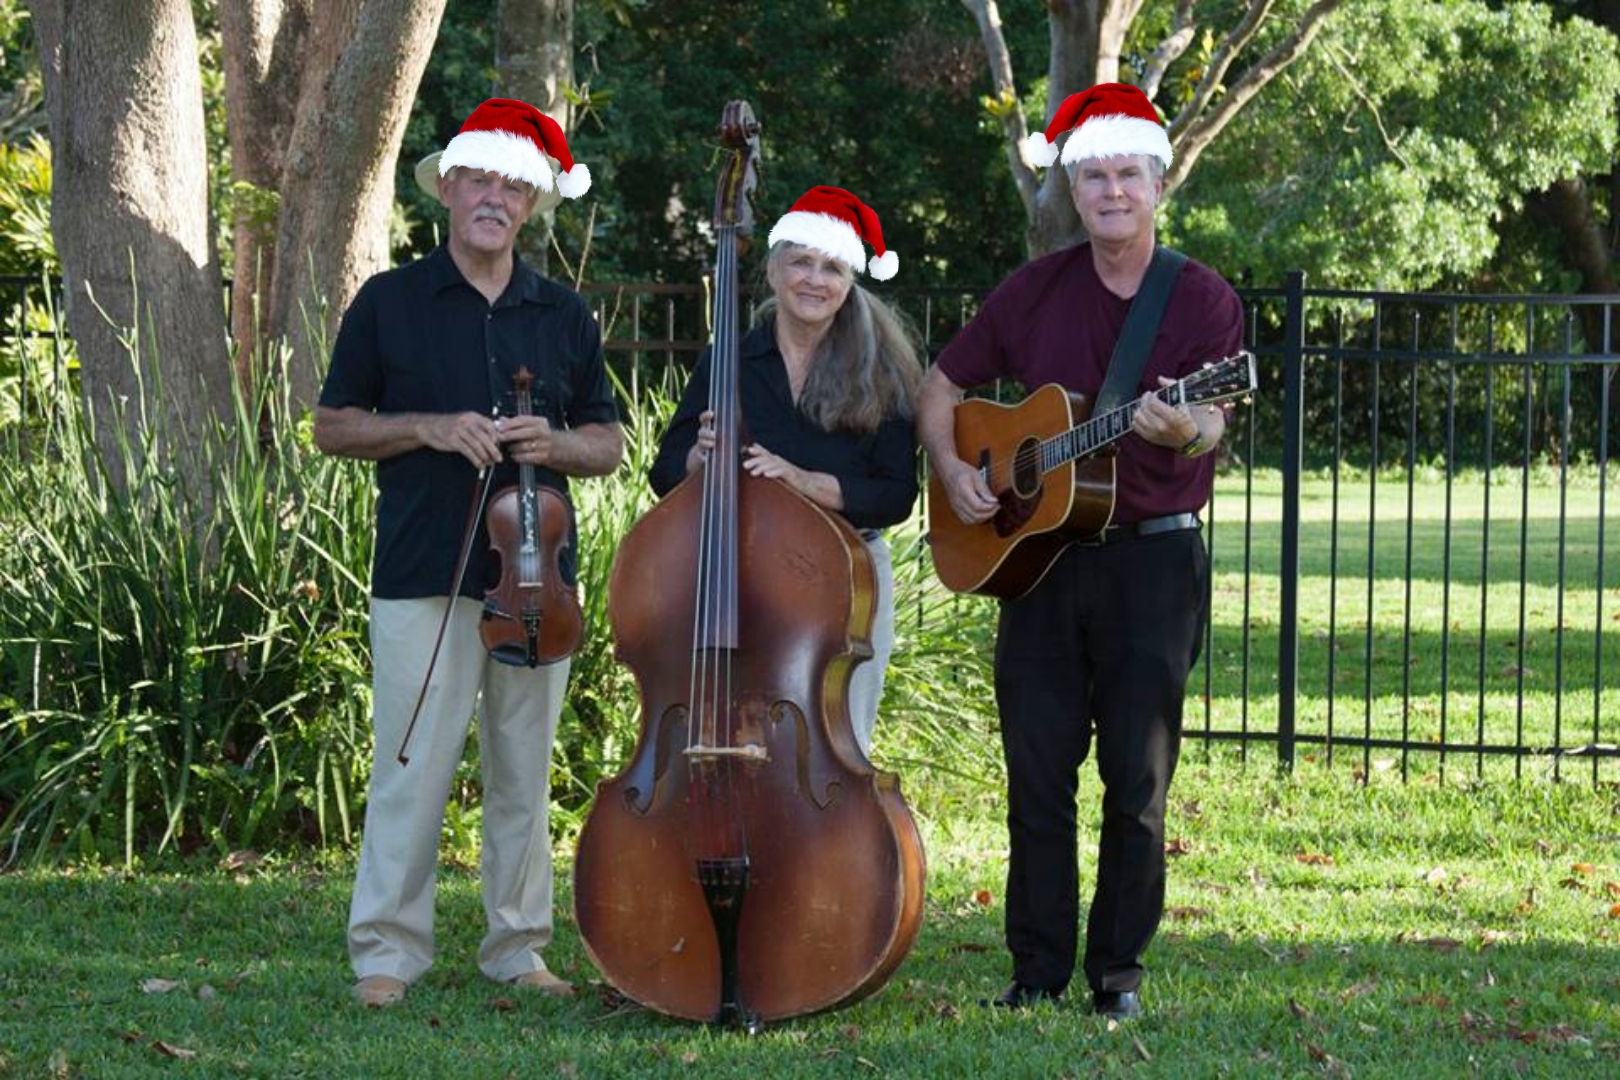 A 2 JOHNS COUNTRY CHRISTMAS, saluting the music of JOHN DENVER AND JOHNNY CASH with the SANDY BACK PORCH TRIO